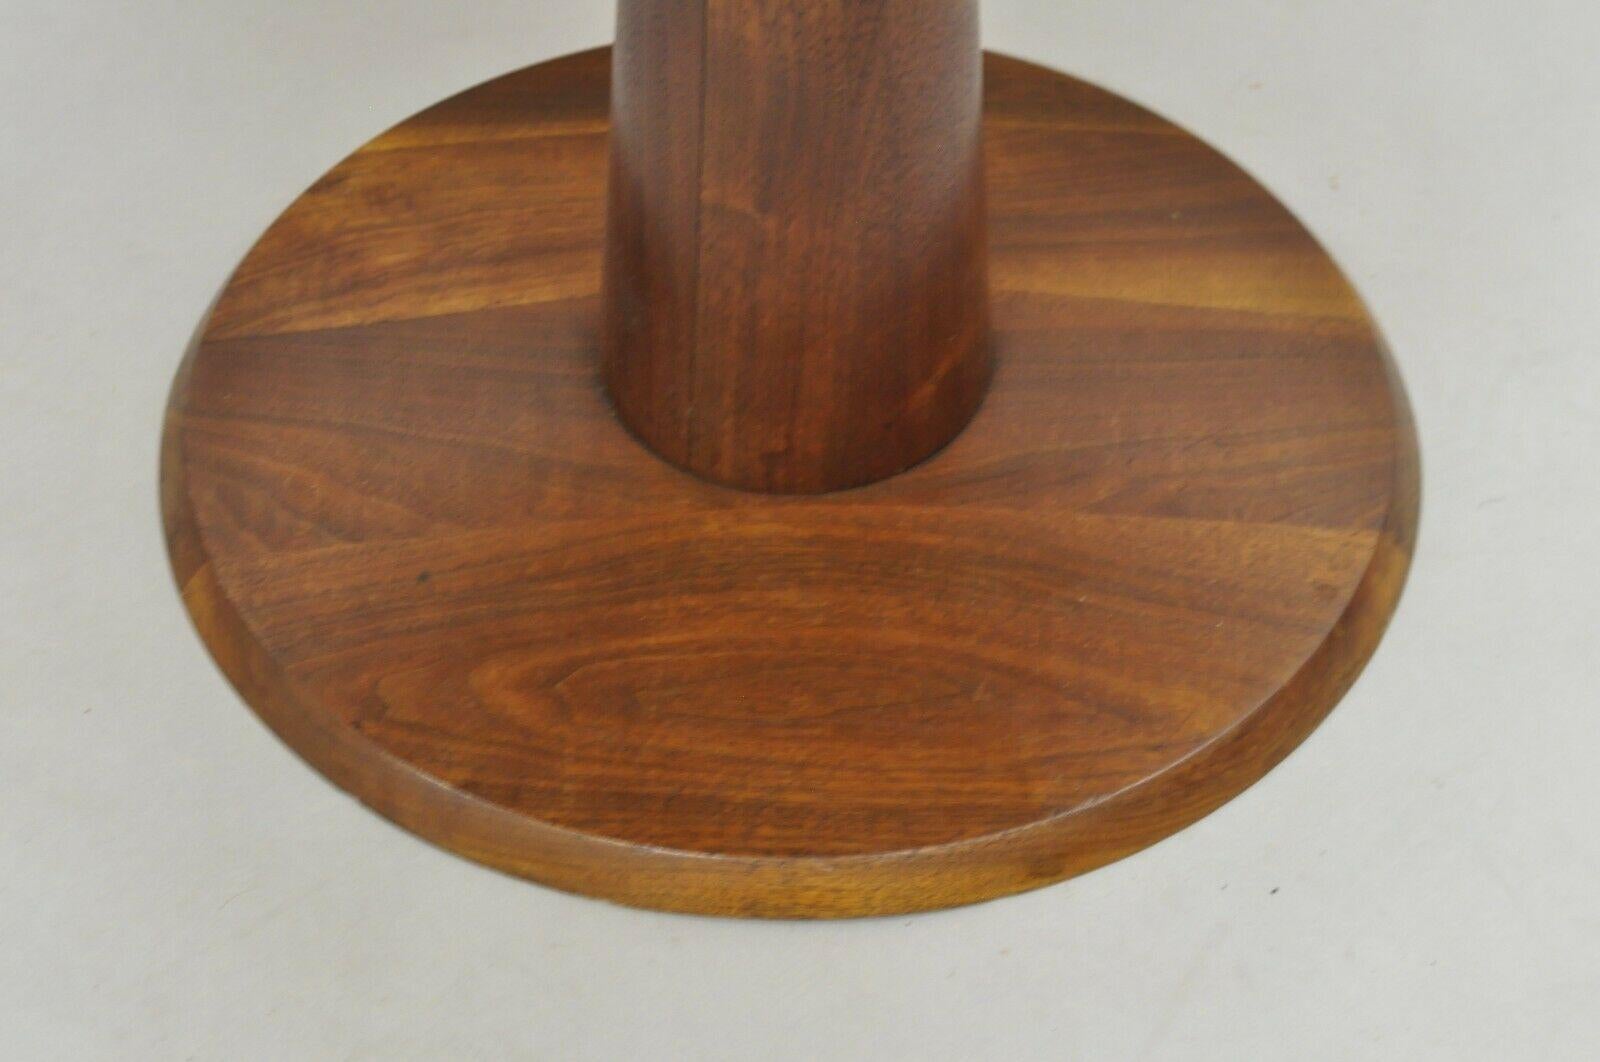 20th Century Mid-Century Modern Walnut Round Dining Table With Hourglass Pedestal Base